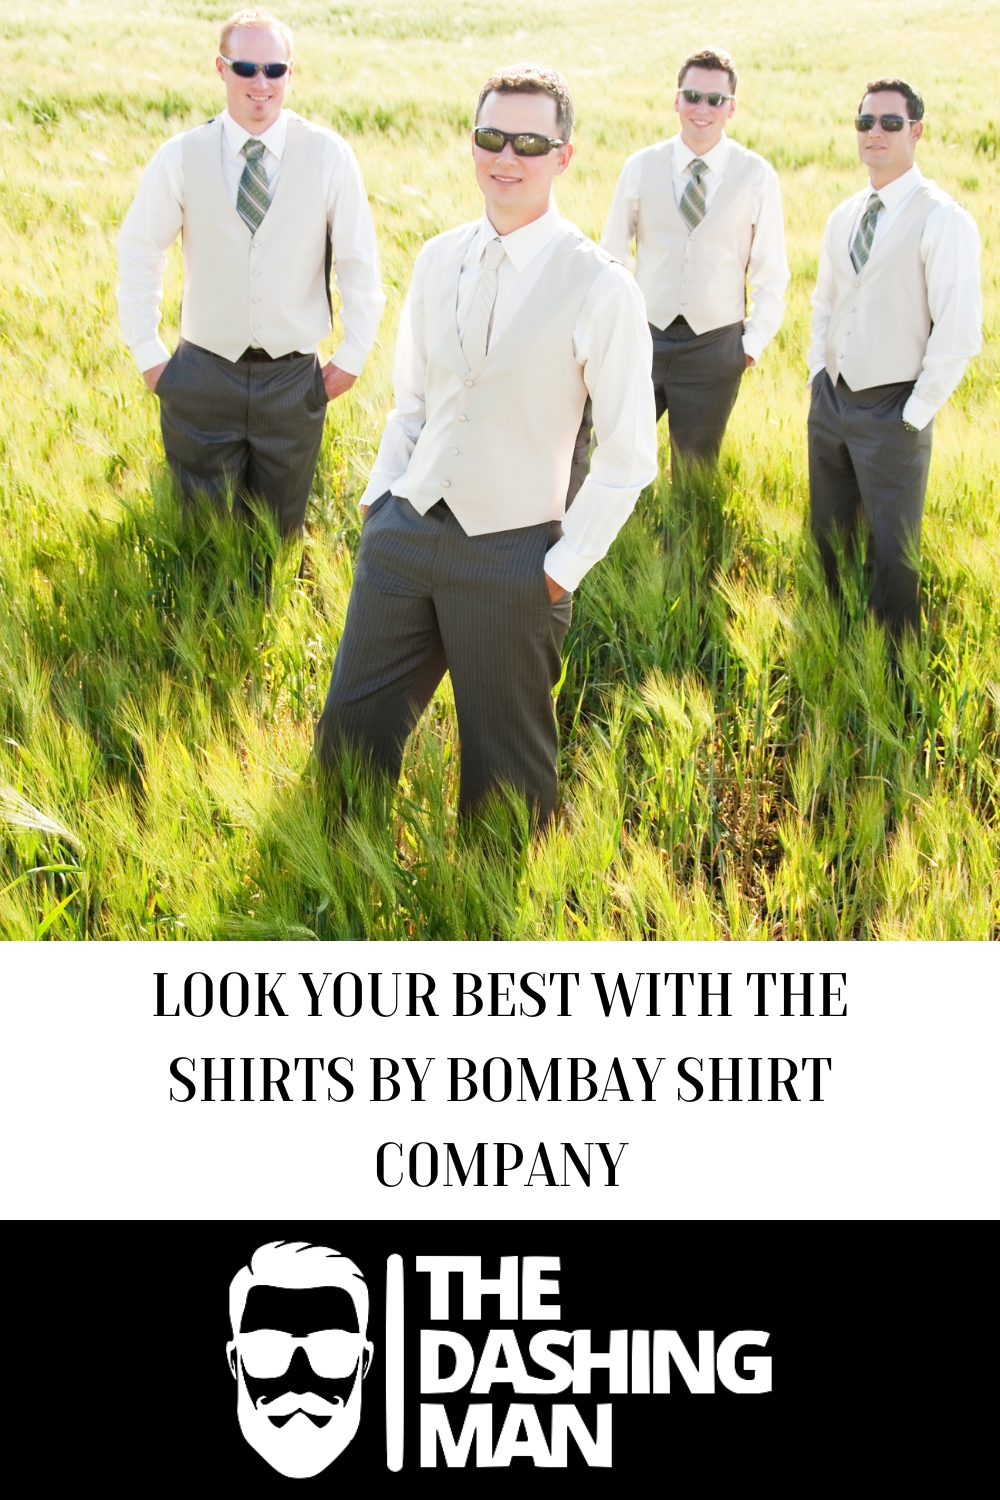 Look Your Best With The Shirts By Bombay Shirt Company